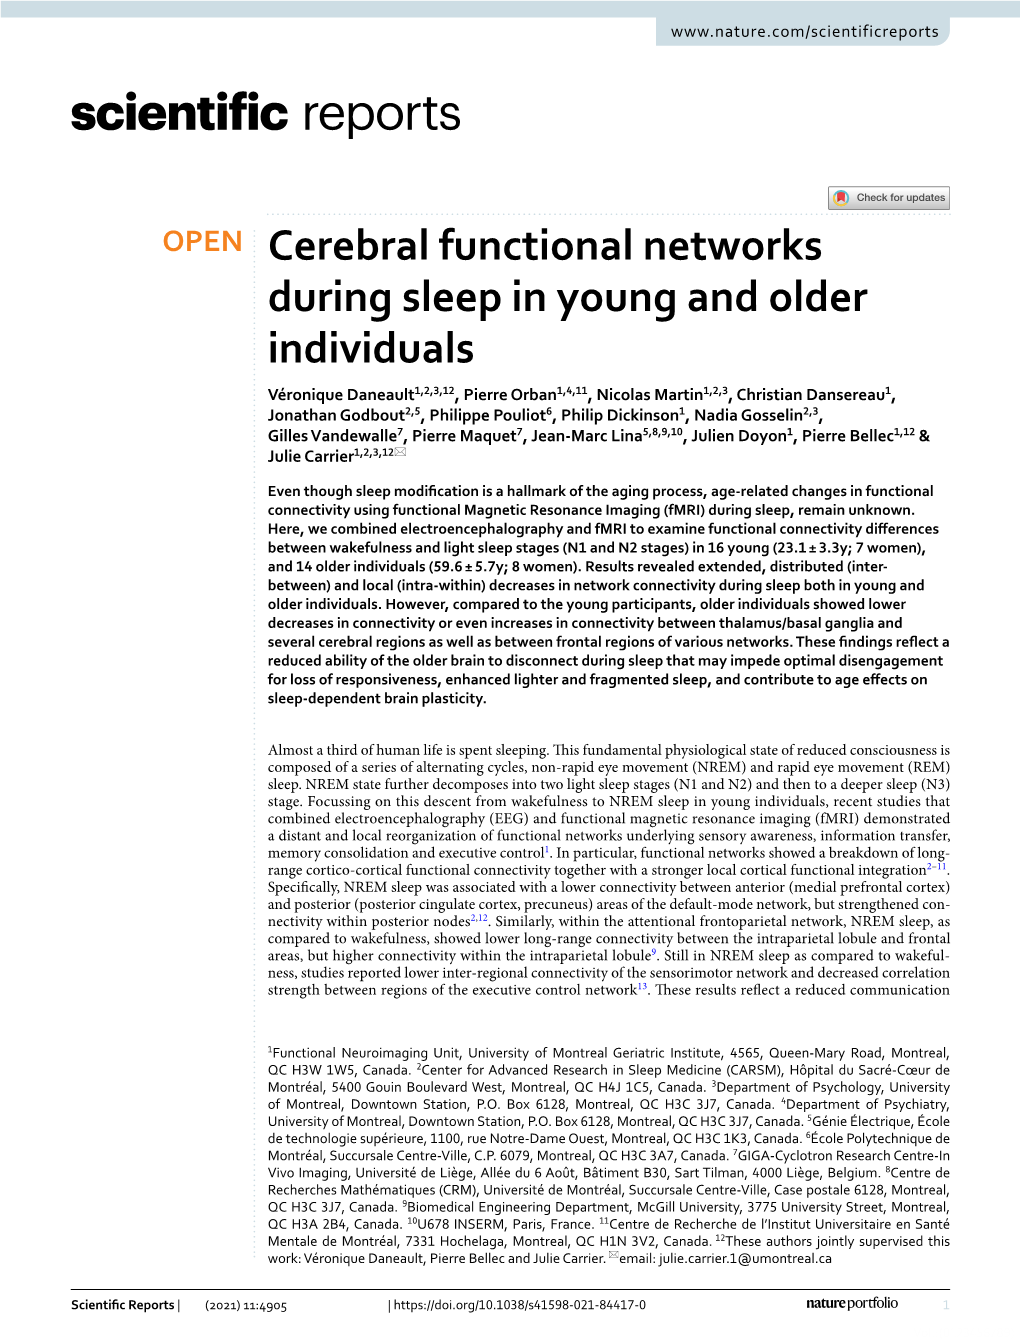 Cerebral Functional Networks During Sleep in Young and Older Individuals